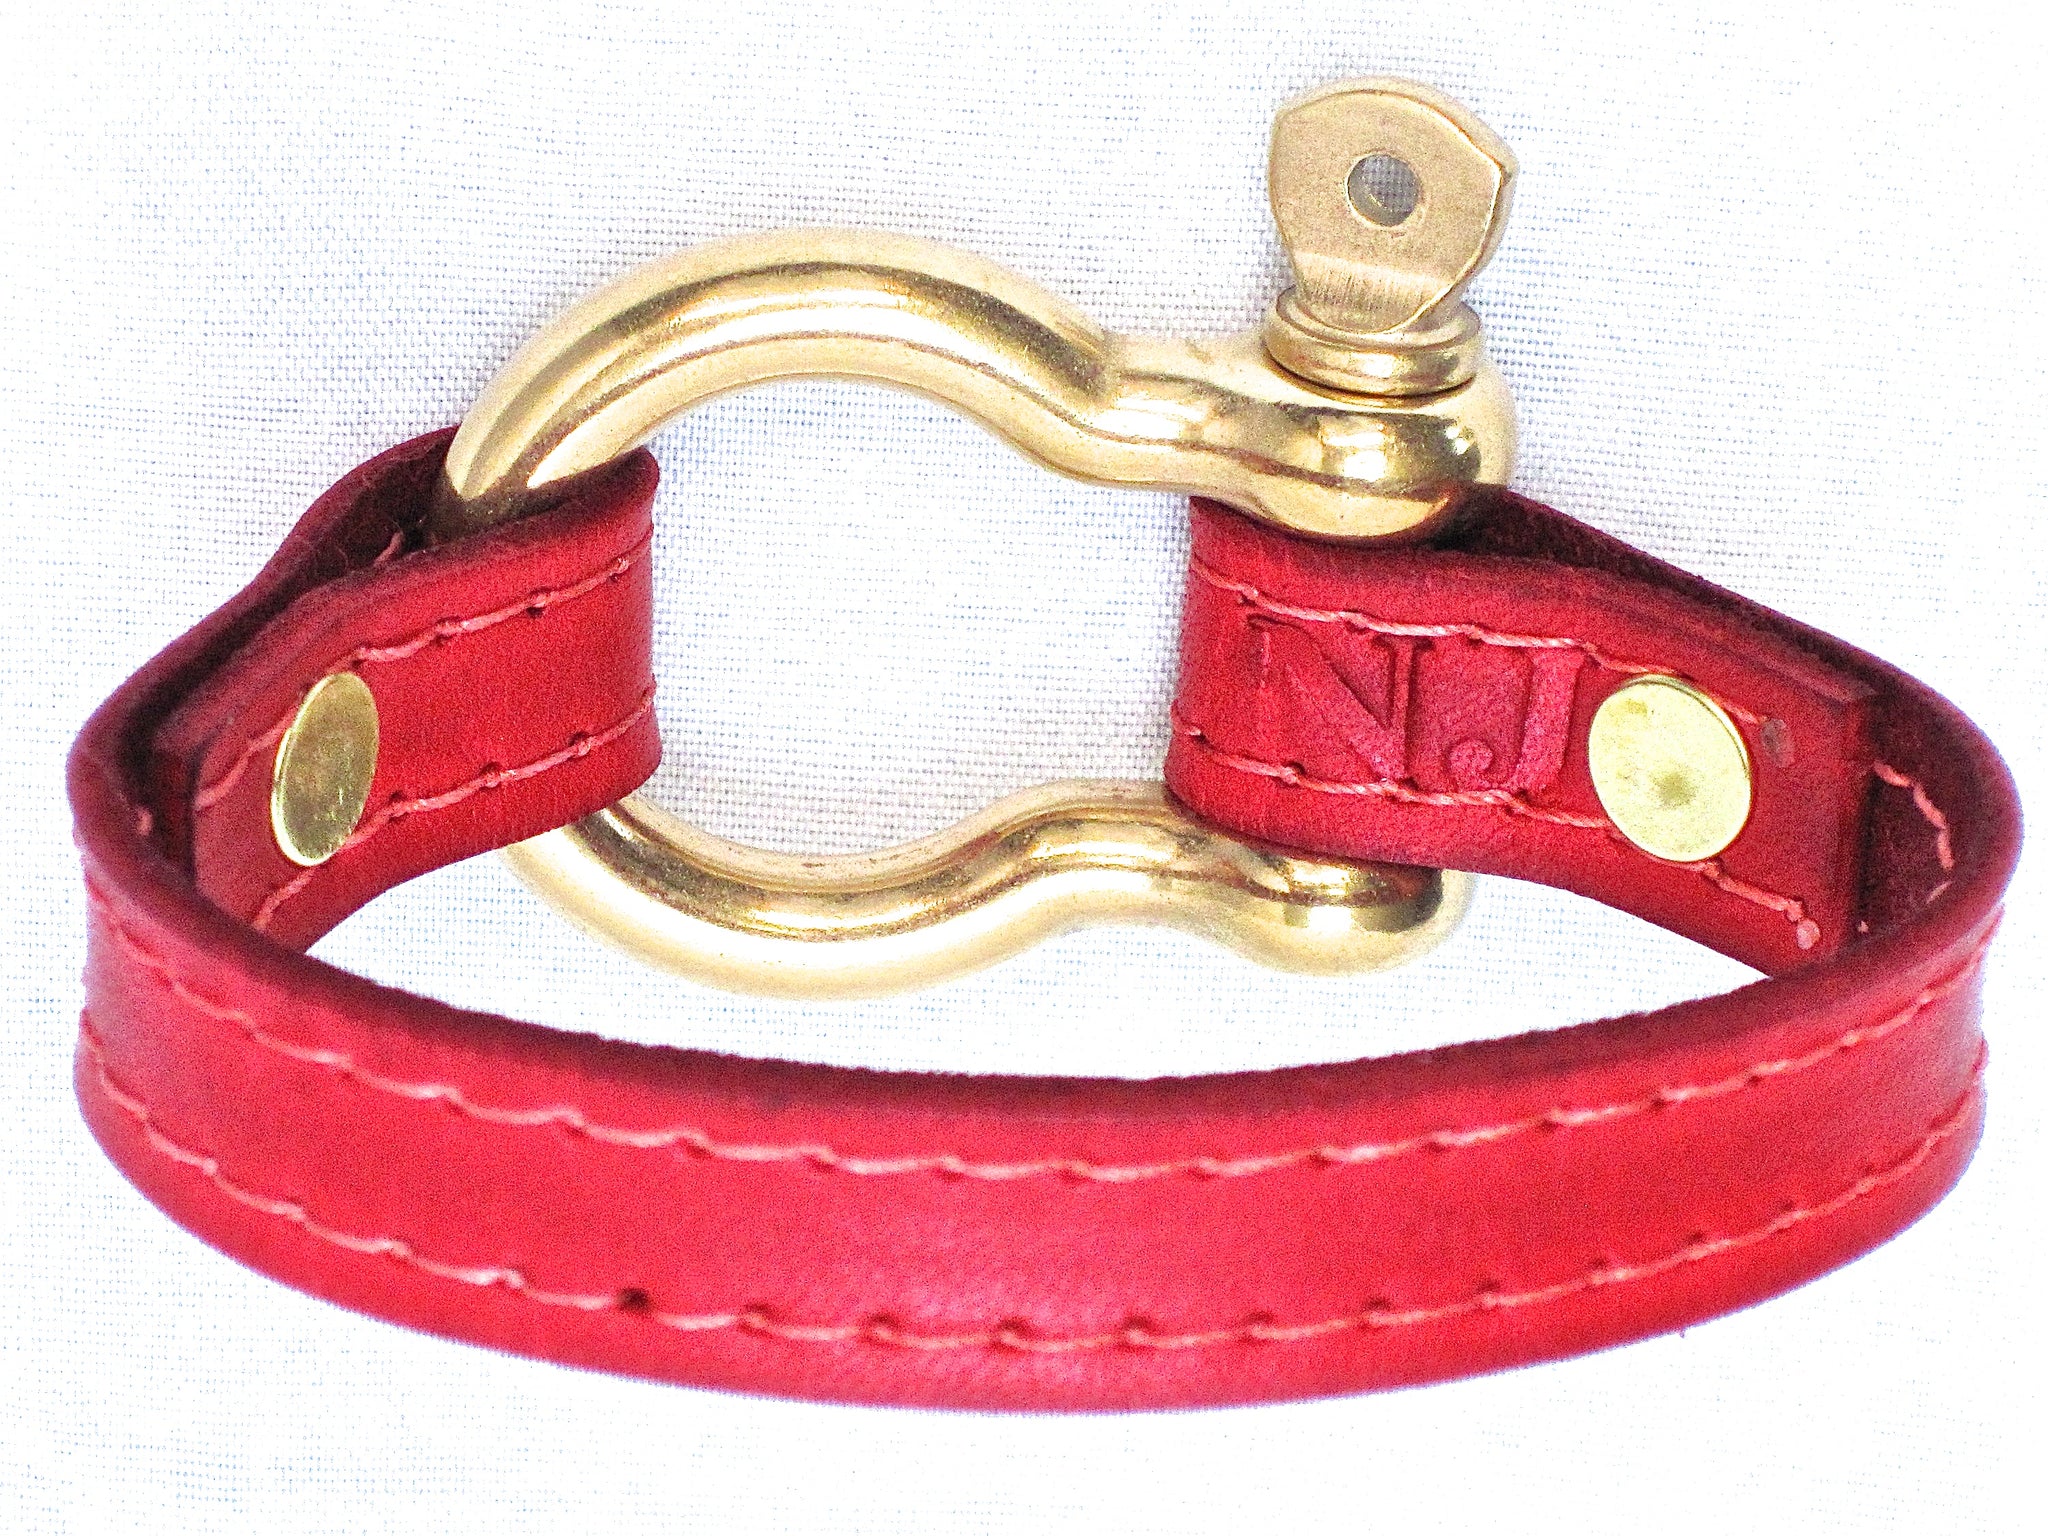 Nyet jewelry Signature Gold Bracelet Red by nyet jewelry